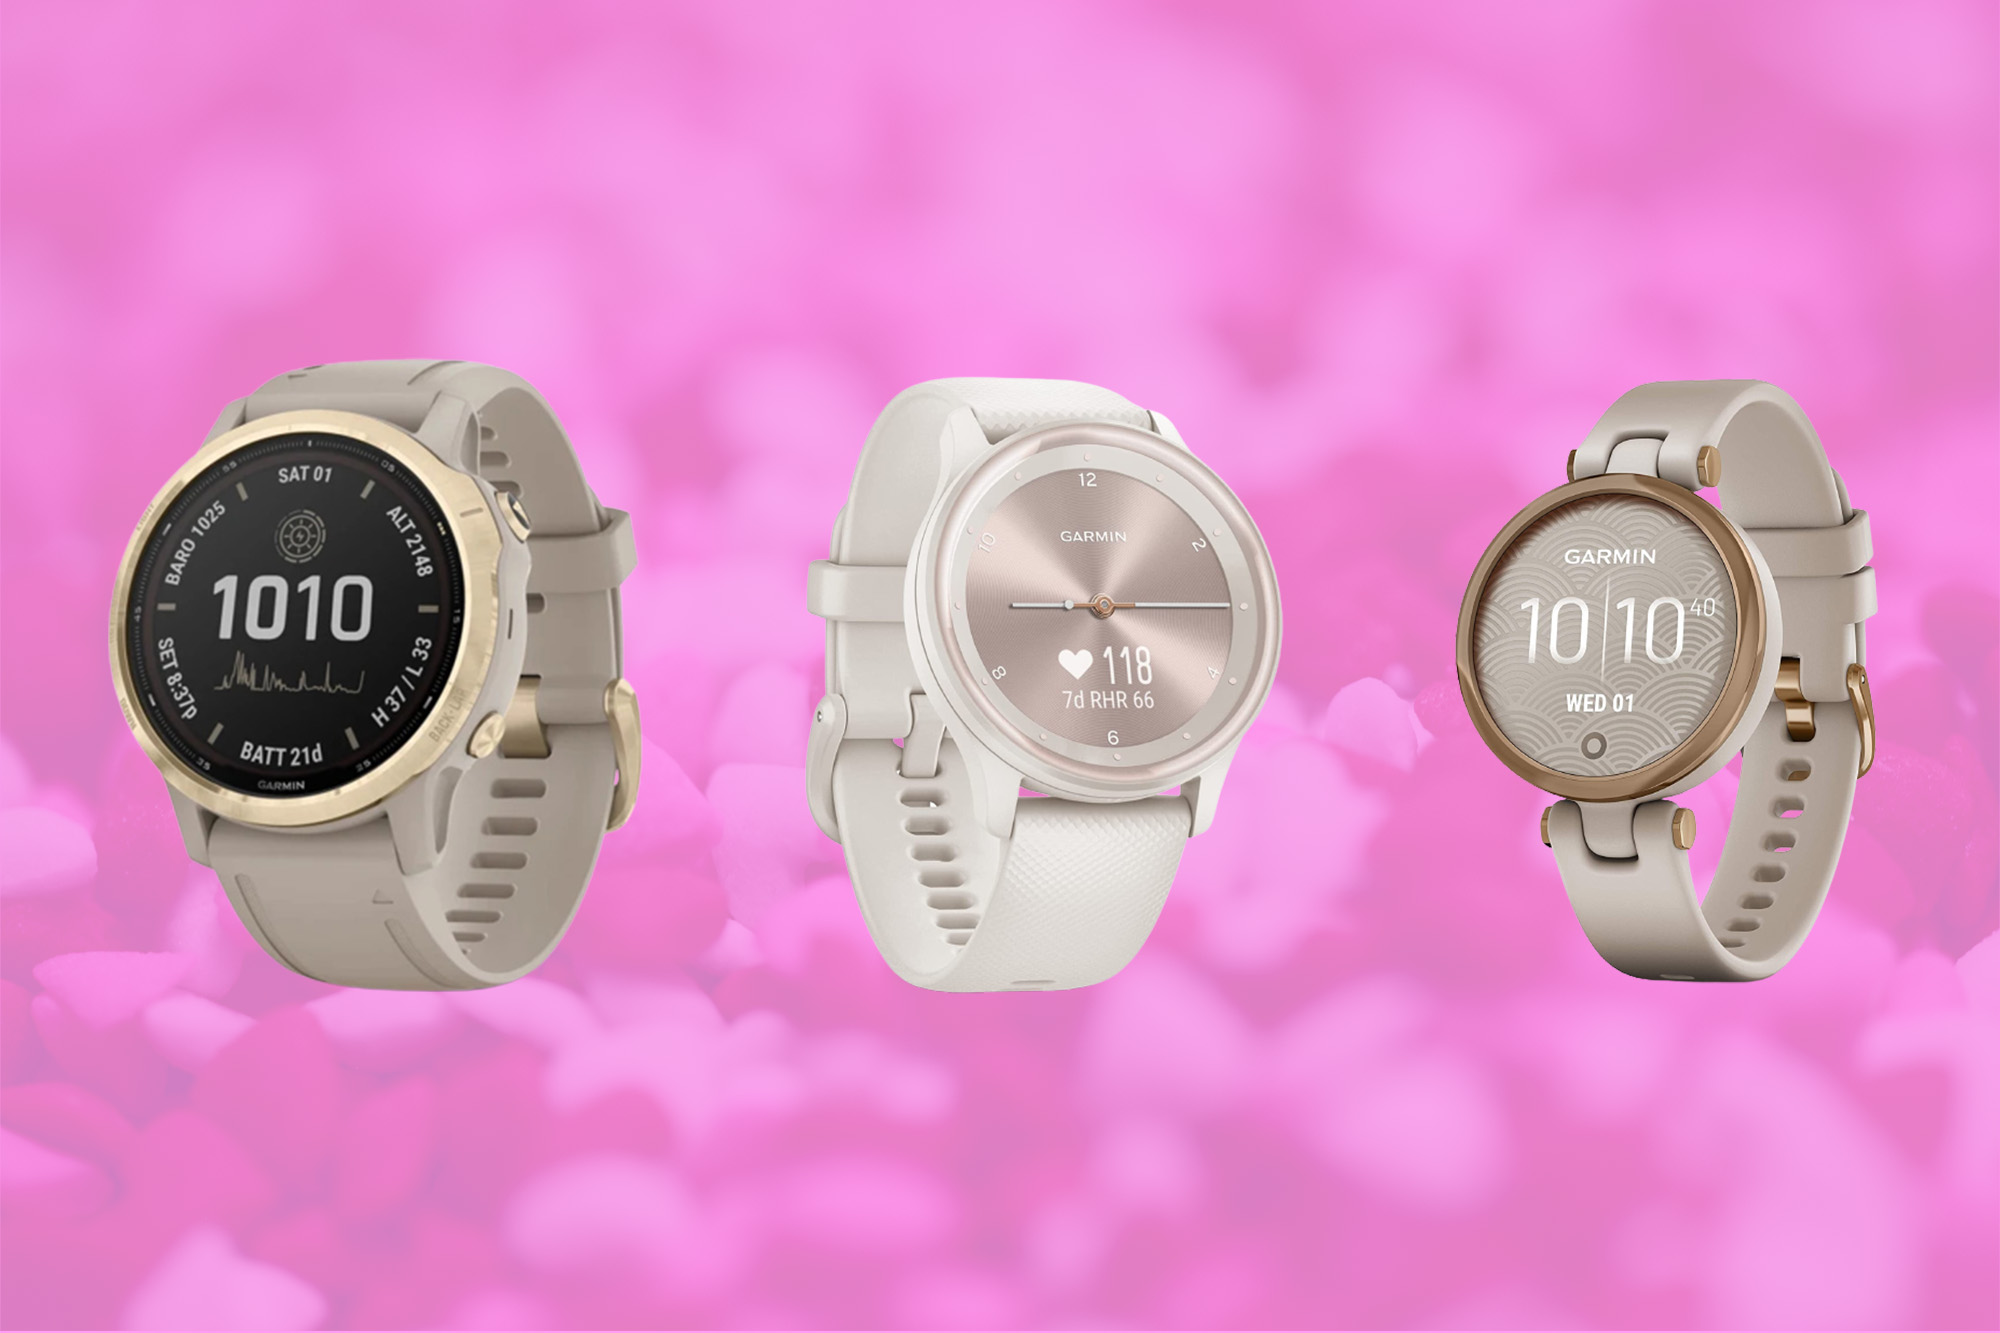 A watch is a timeless gift—snag one from Garmin for up to $400 off